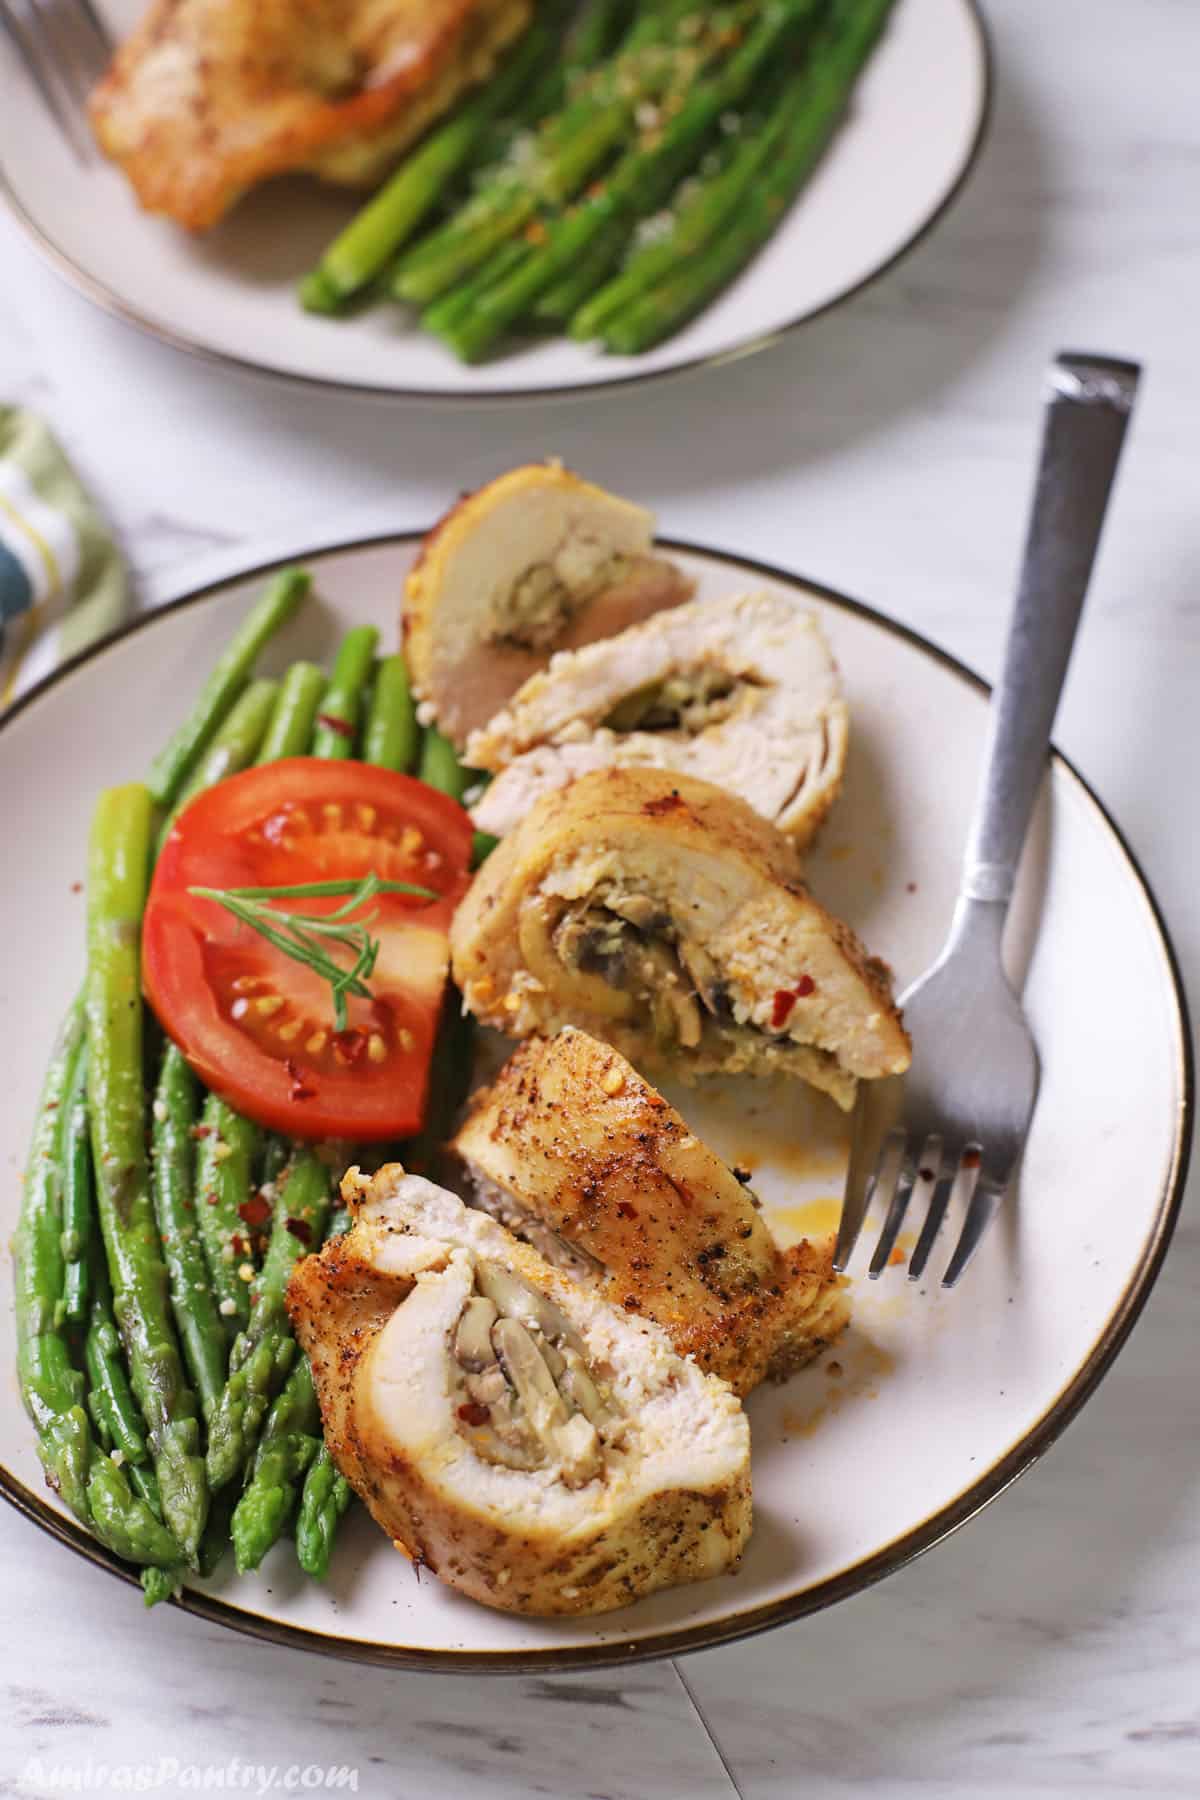 A white plate with stuffed chicken breast cut into pieces with some asparagus and tomato in the plate as well.